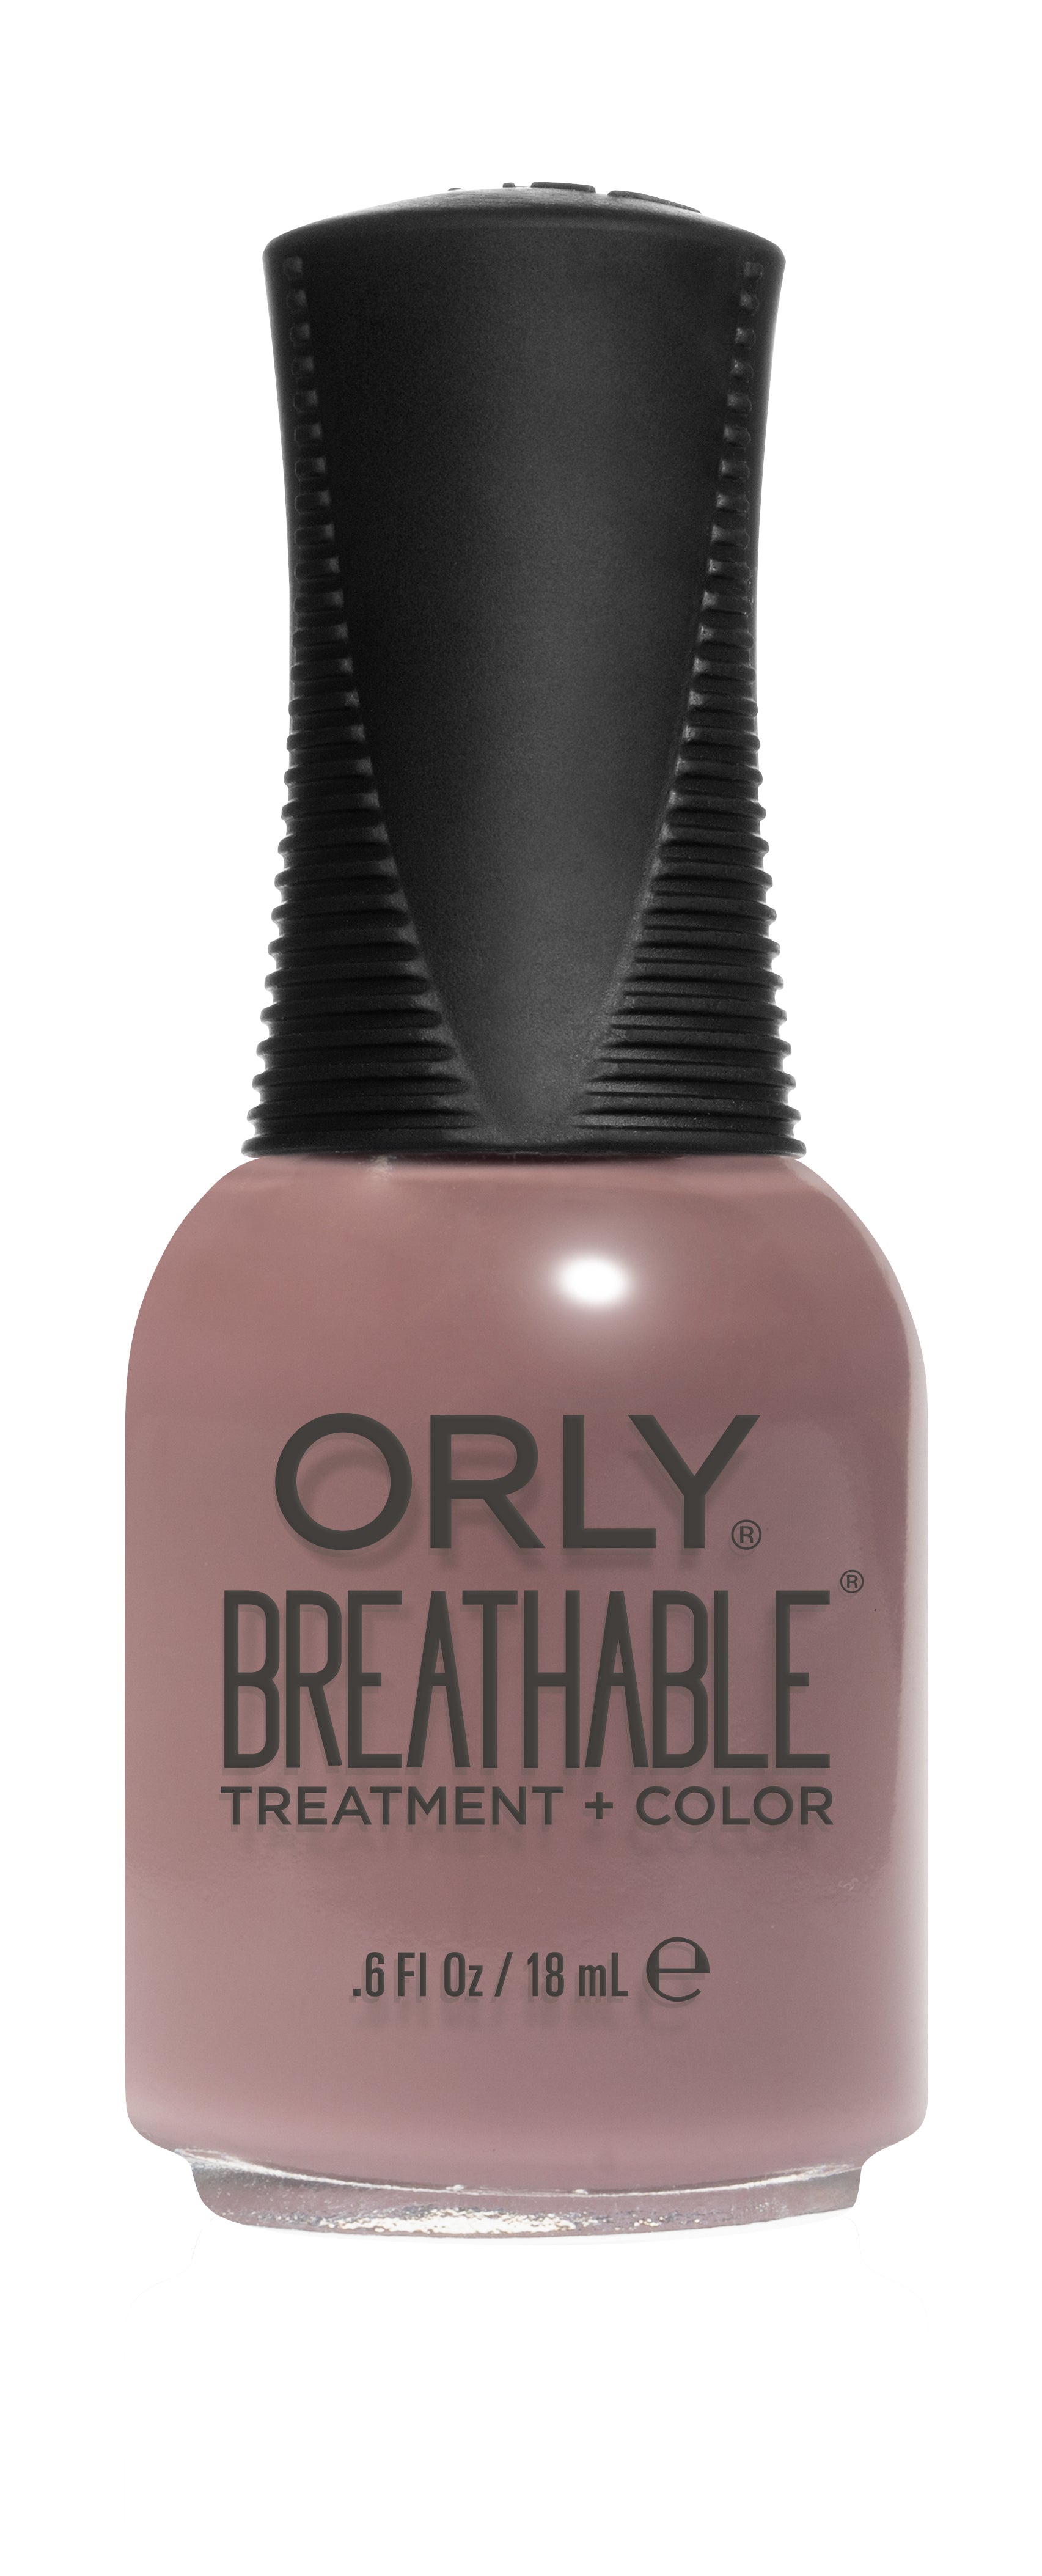 Shift Happens - ORLY Breathable Treatment + Color